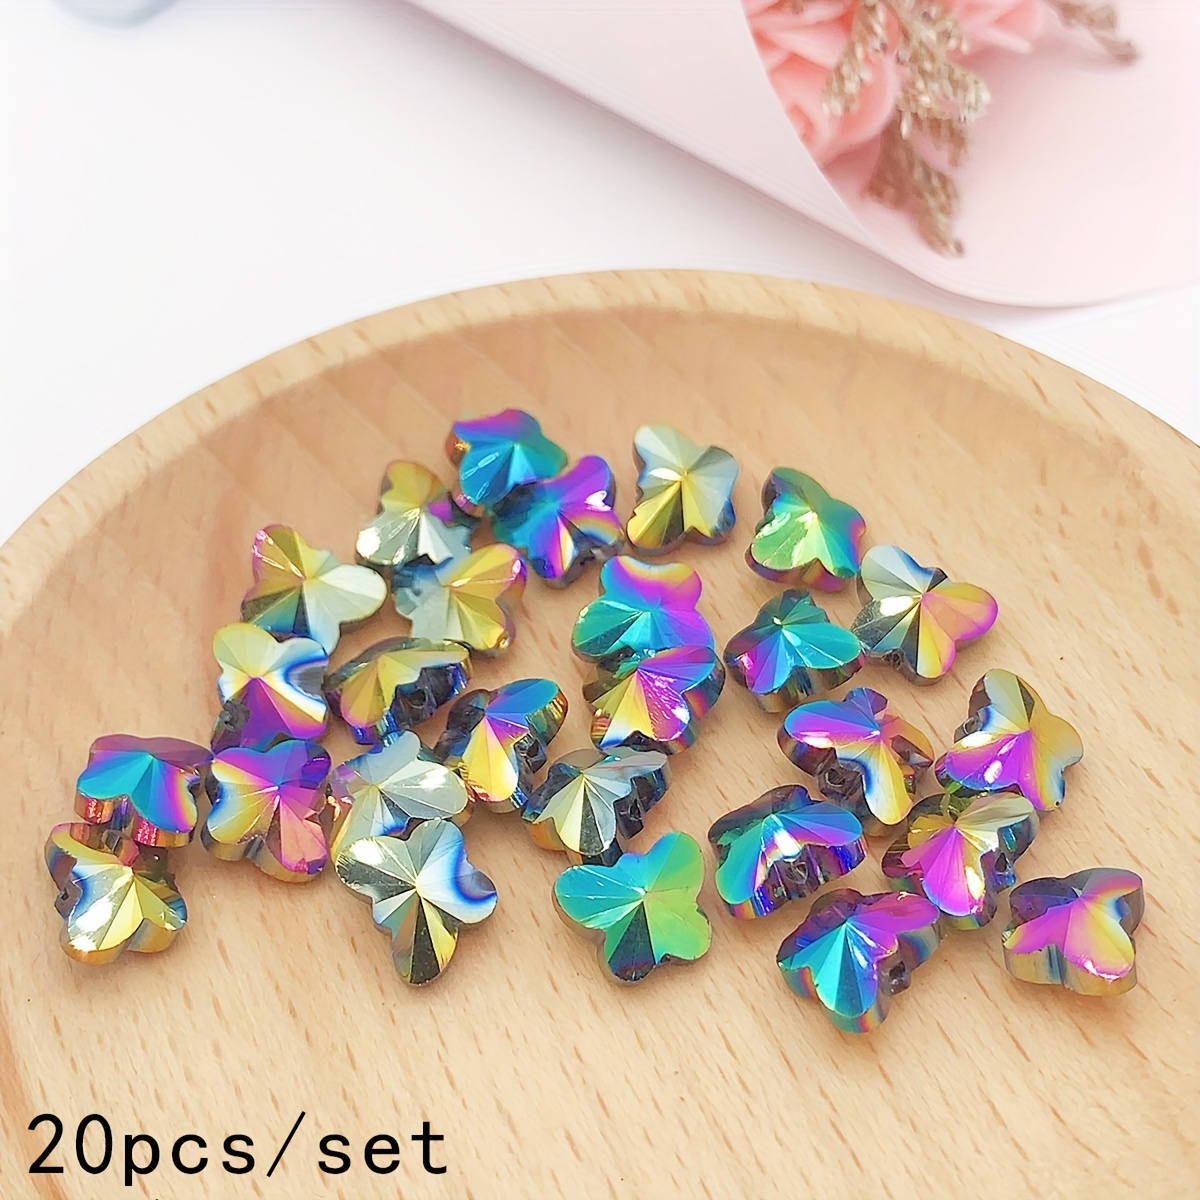 Glass Butterfly Beads Clear Beads Clear Butterfly Beads 2 Sided Top Drilled  Beads Spring Beads AB Shimmer Beads Monarch Jewelry 10pcs 13mm